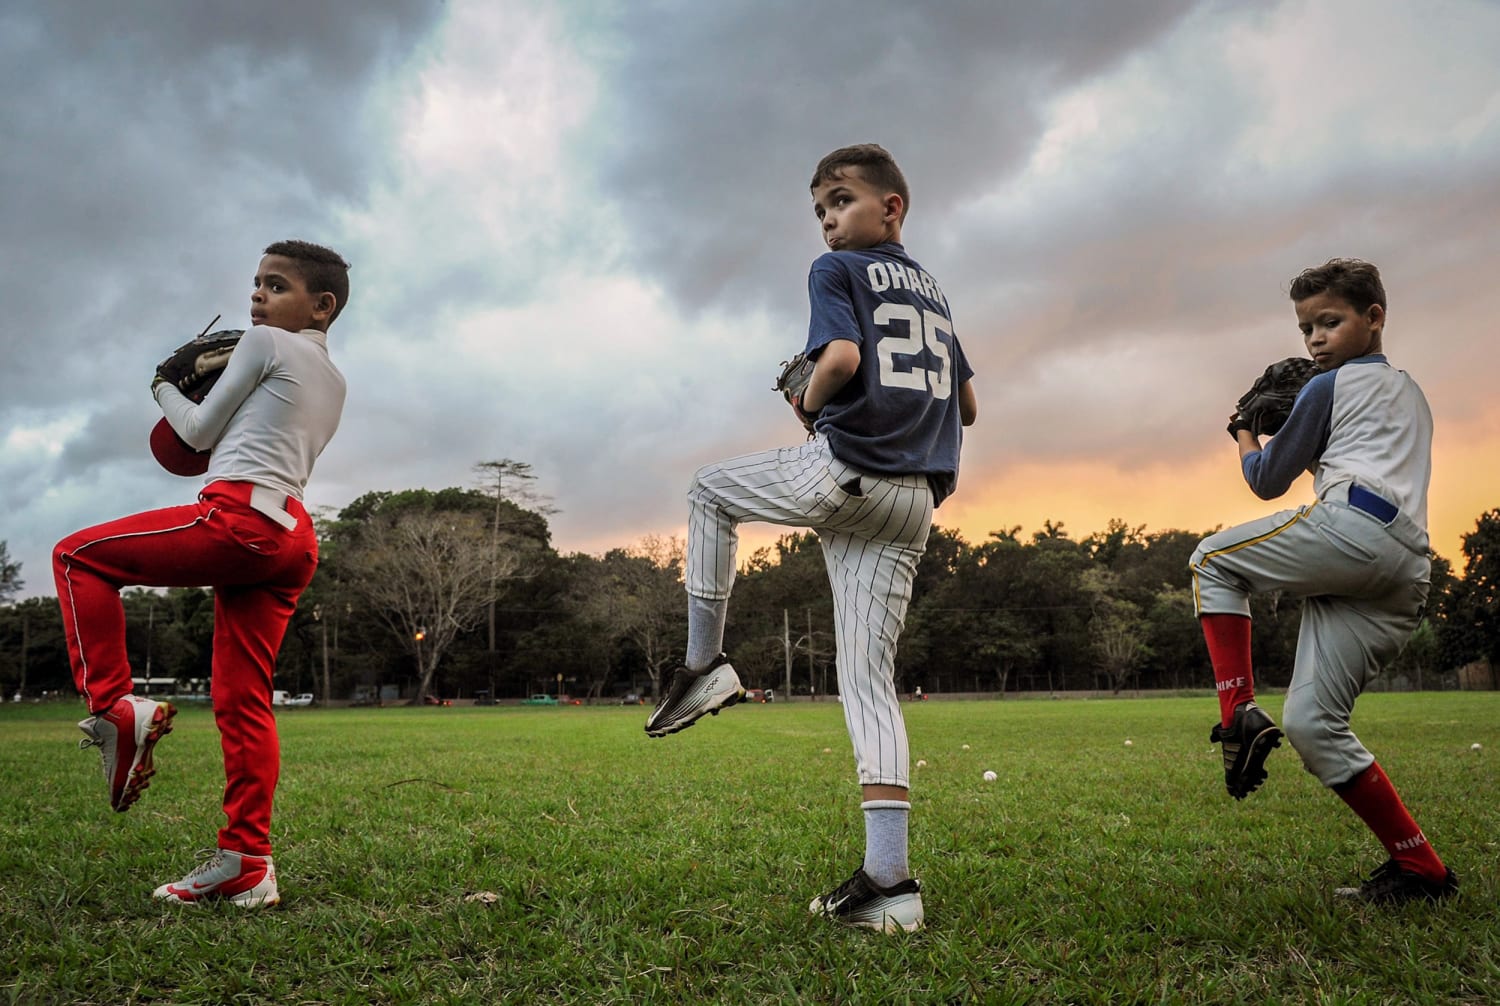 Crafting Rules For Cuban Baseball Players